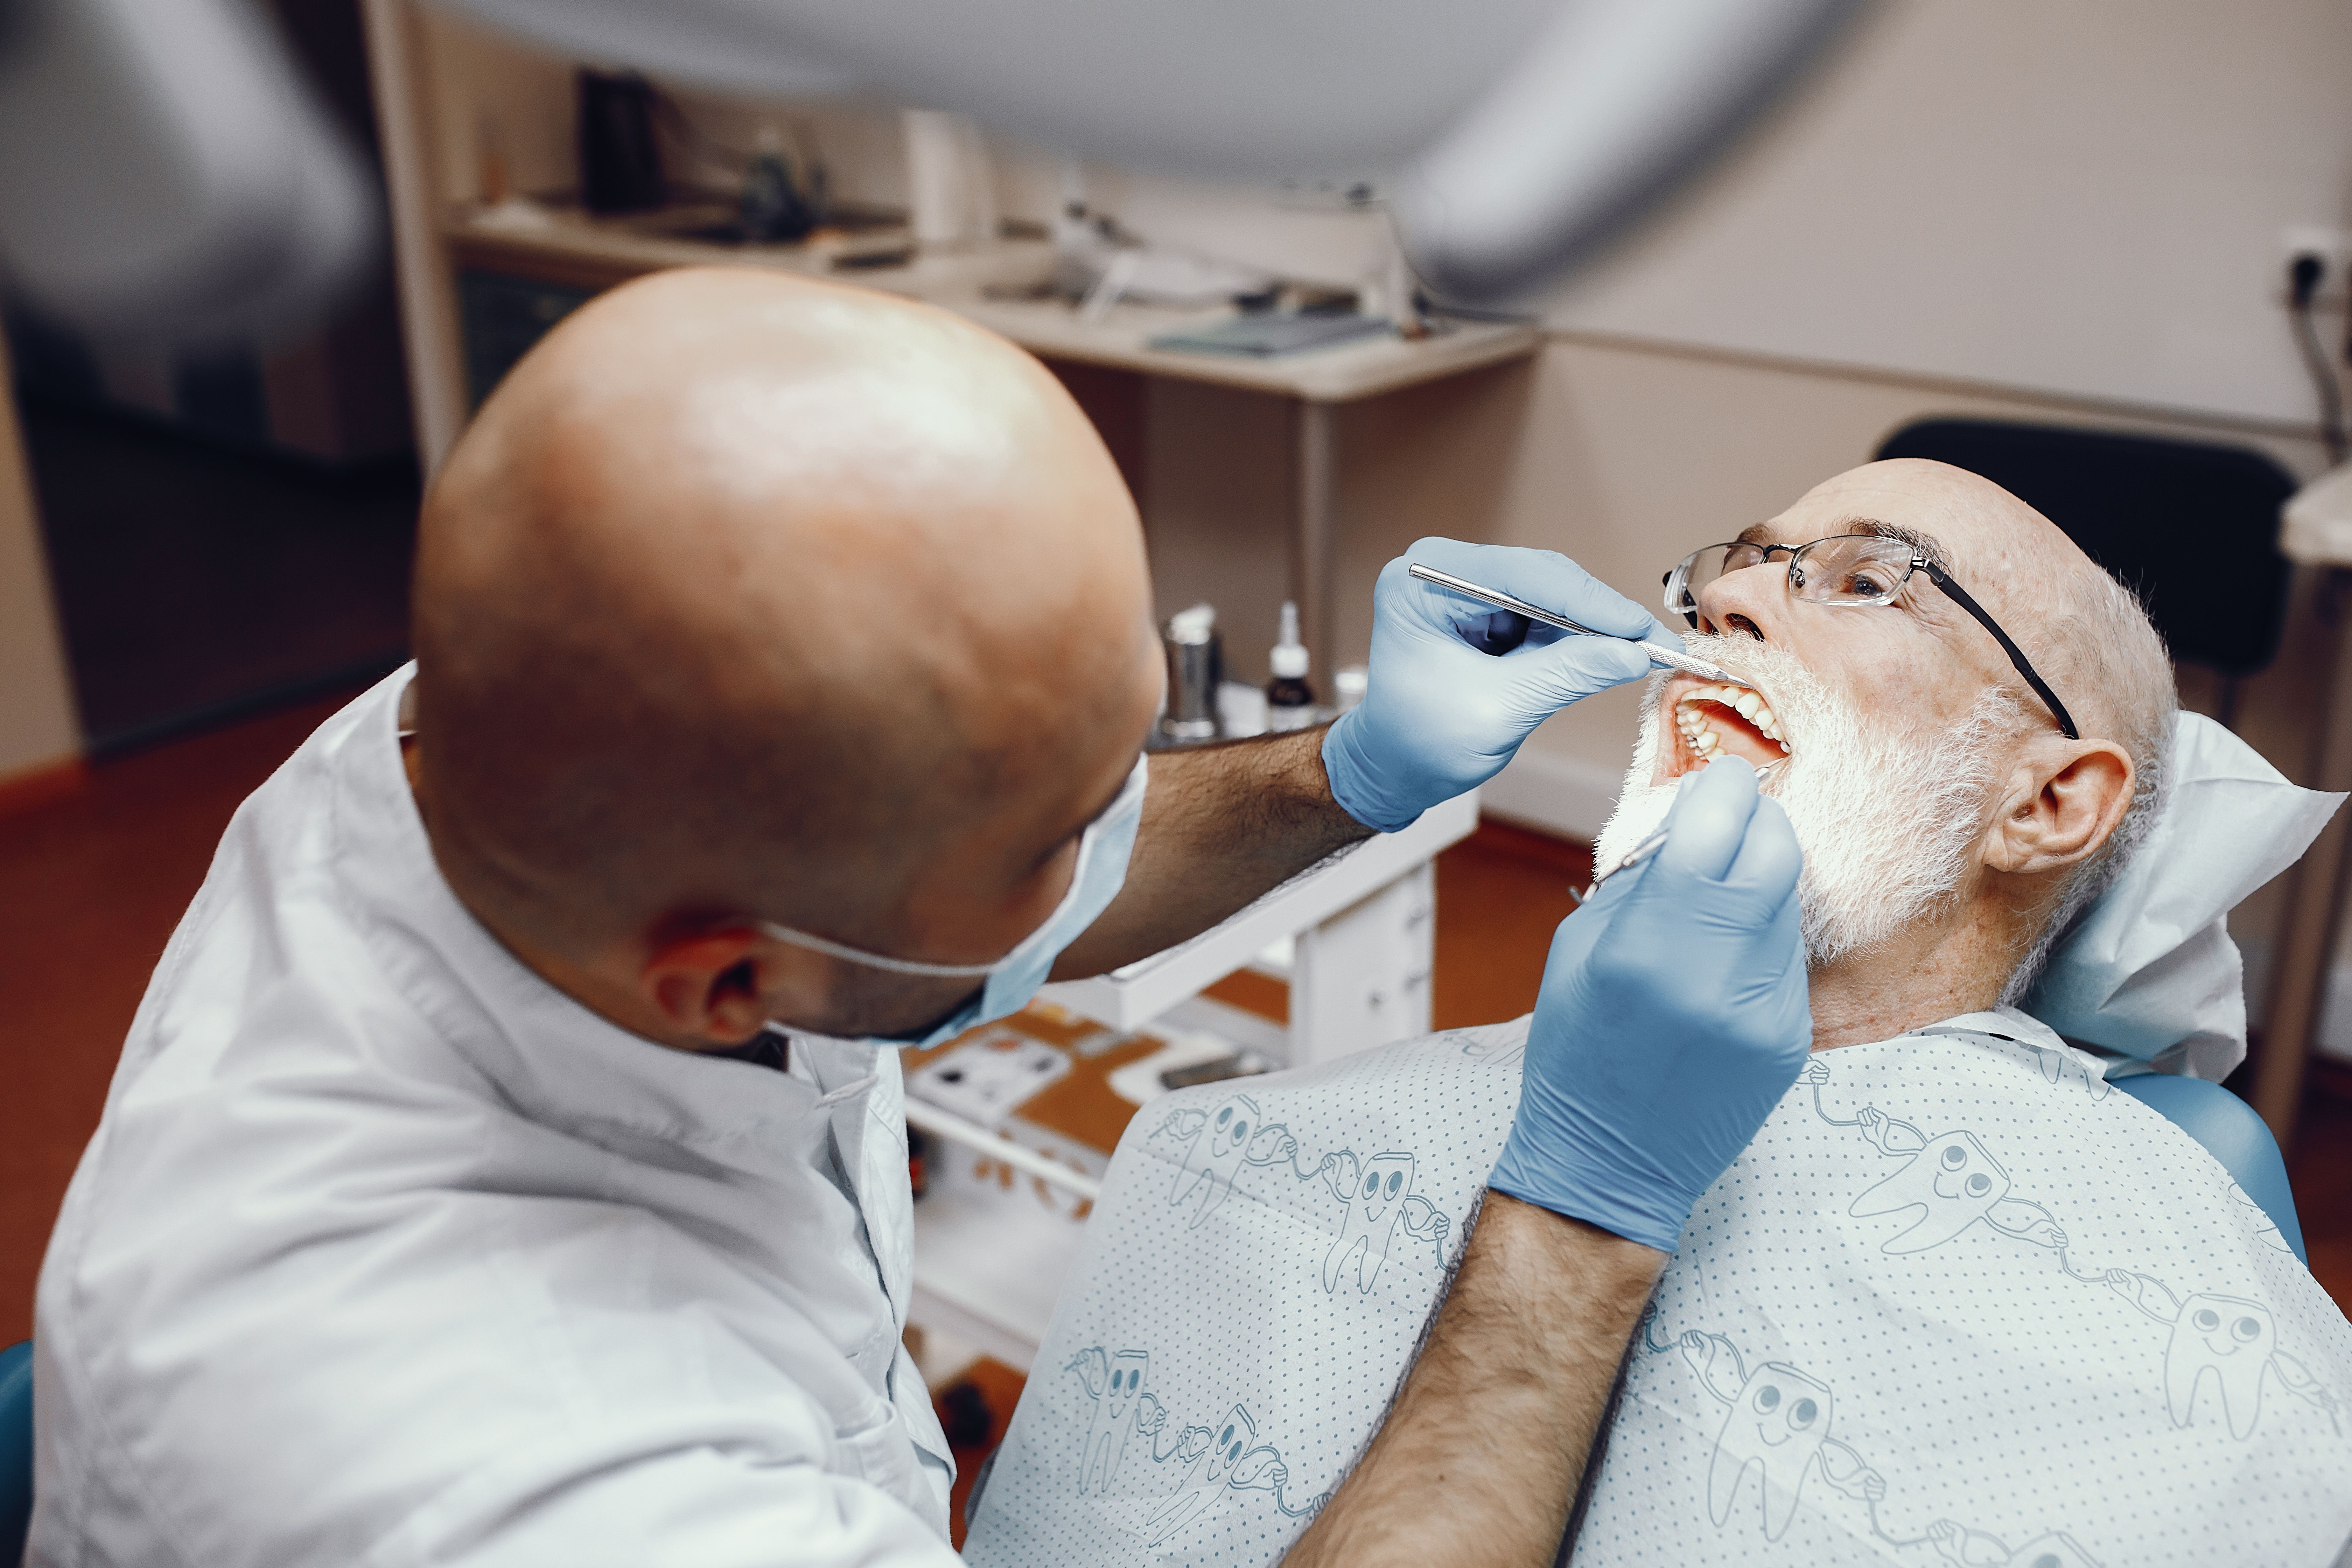 Root Canal Treatment: What Happens During the Procedure?